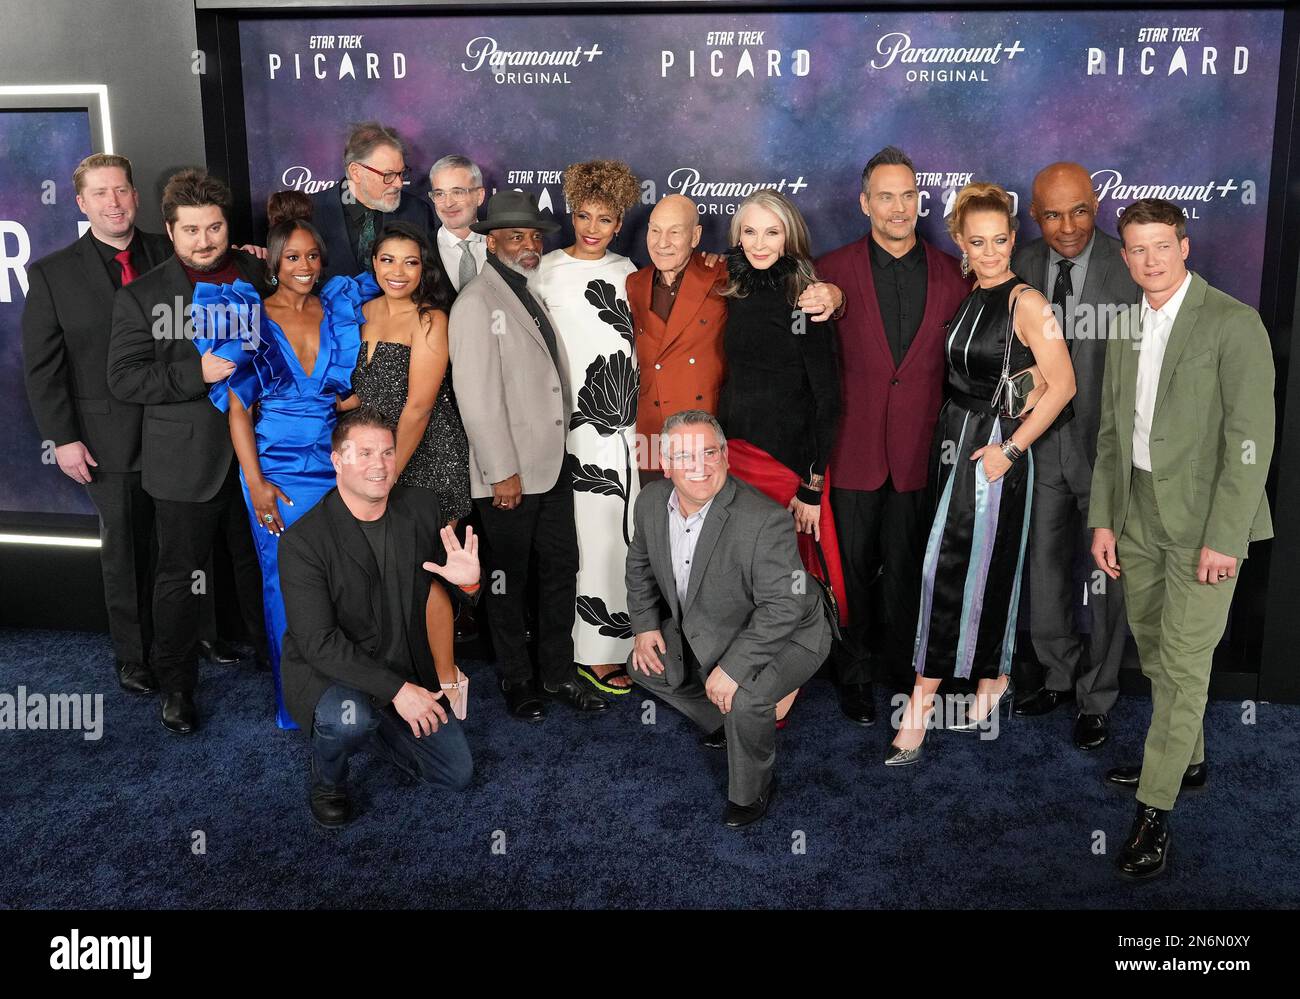 Los Angeles, USA. 09th Feb, 2023. STAR TREK: PICARD Cast & Crew at the Paramount  Original Series' STAR TREK: PICARD Final Season Premiere held at the TCL Chinese Theatre in Hollywood, CA on Thursday, February 9, 2023. (Photo By Sthanlee B. Mirador/Sipa USA) Credit: Sipa USA/Alamy Live News Stock Photo